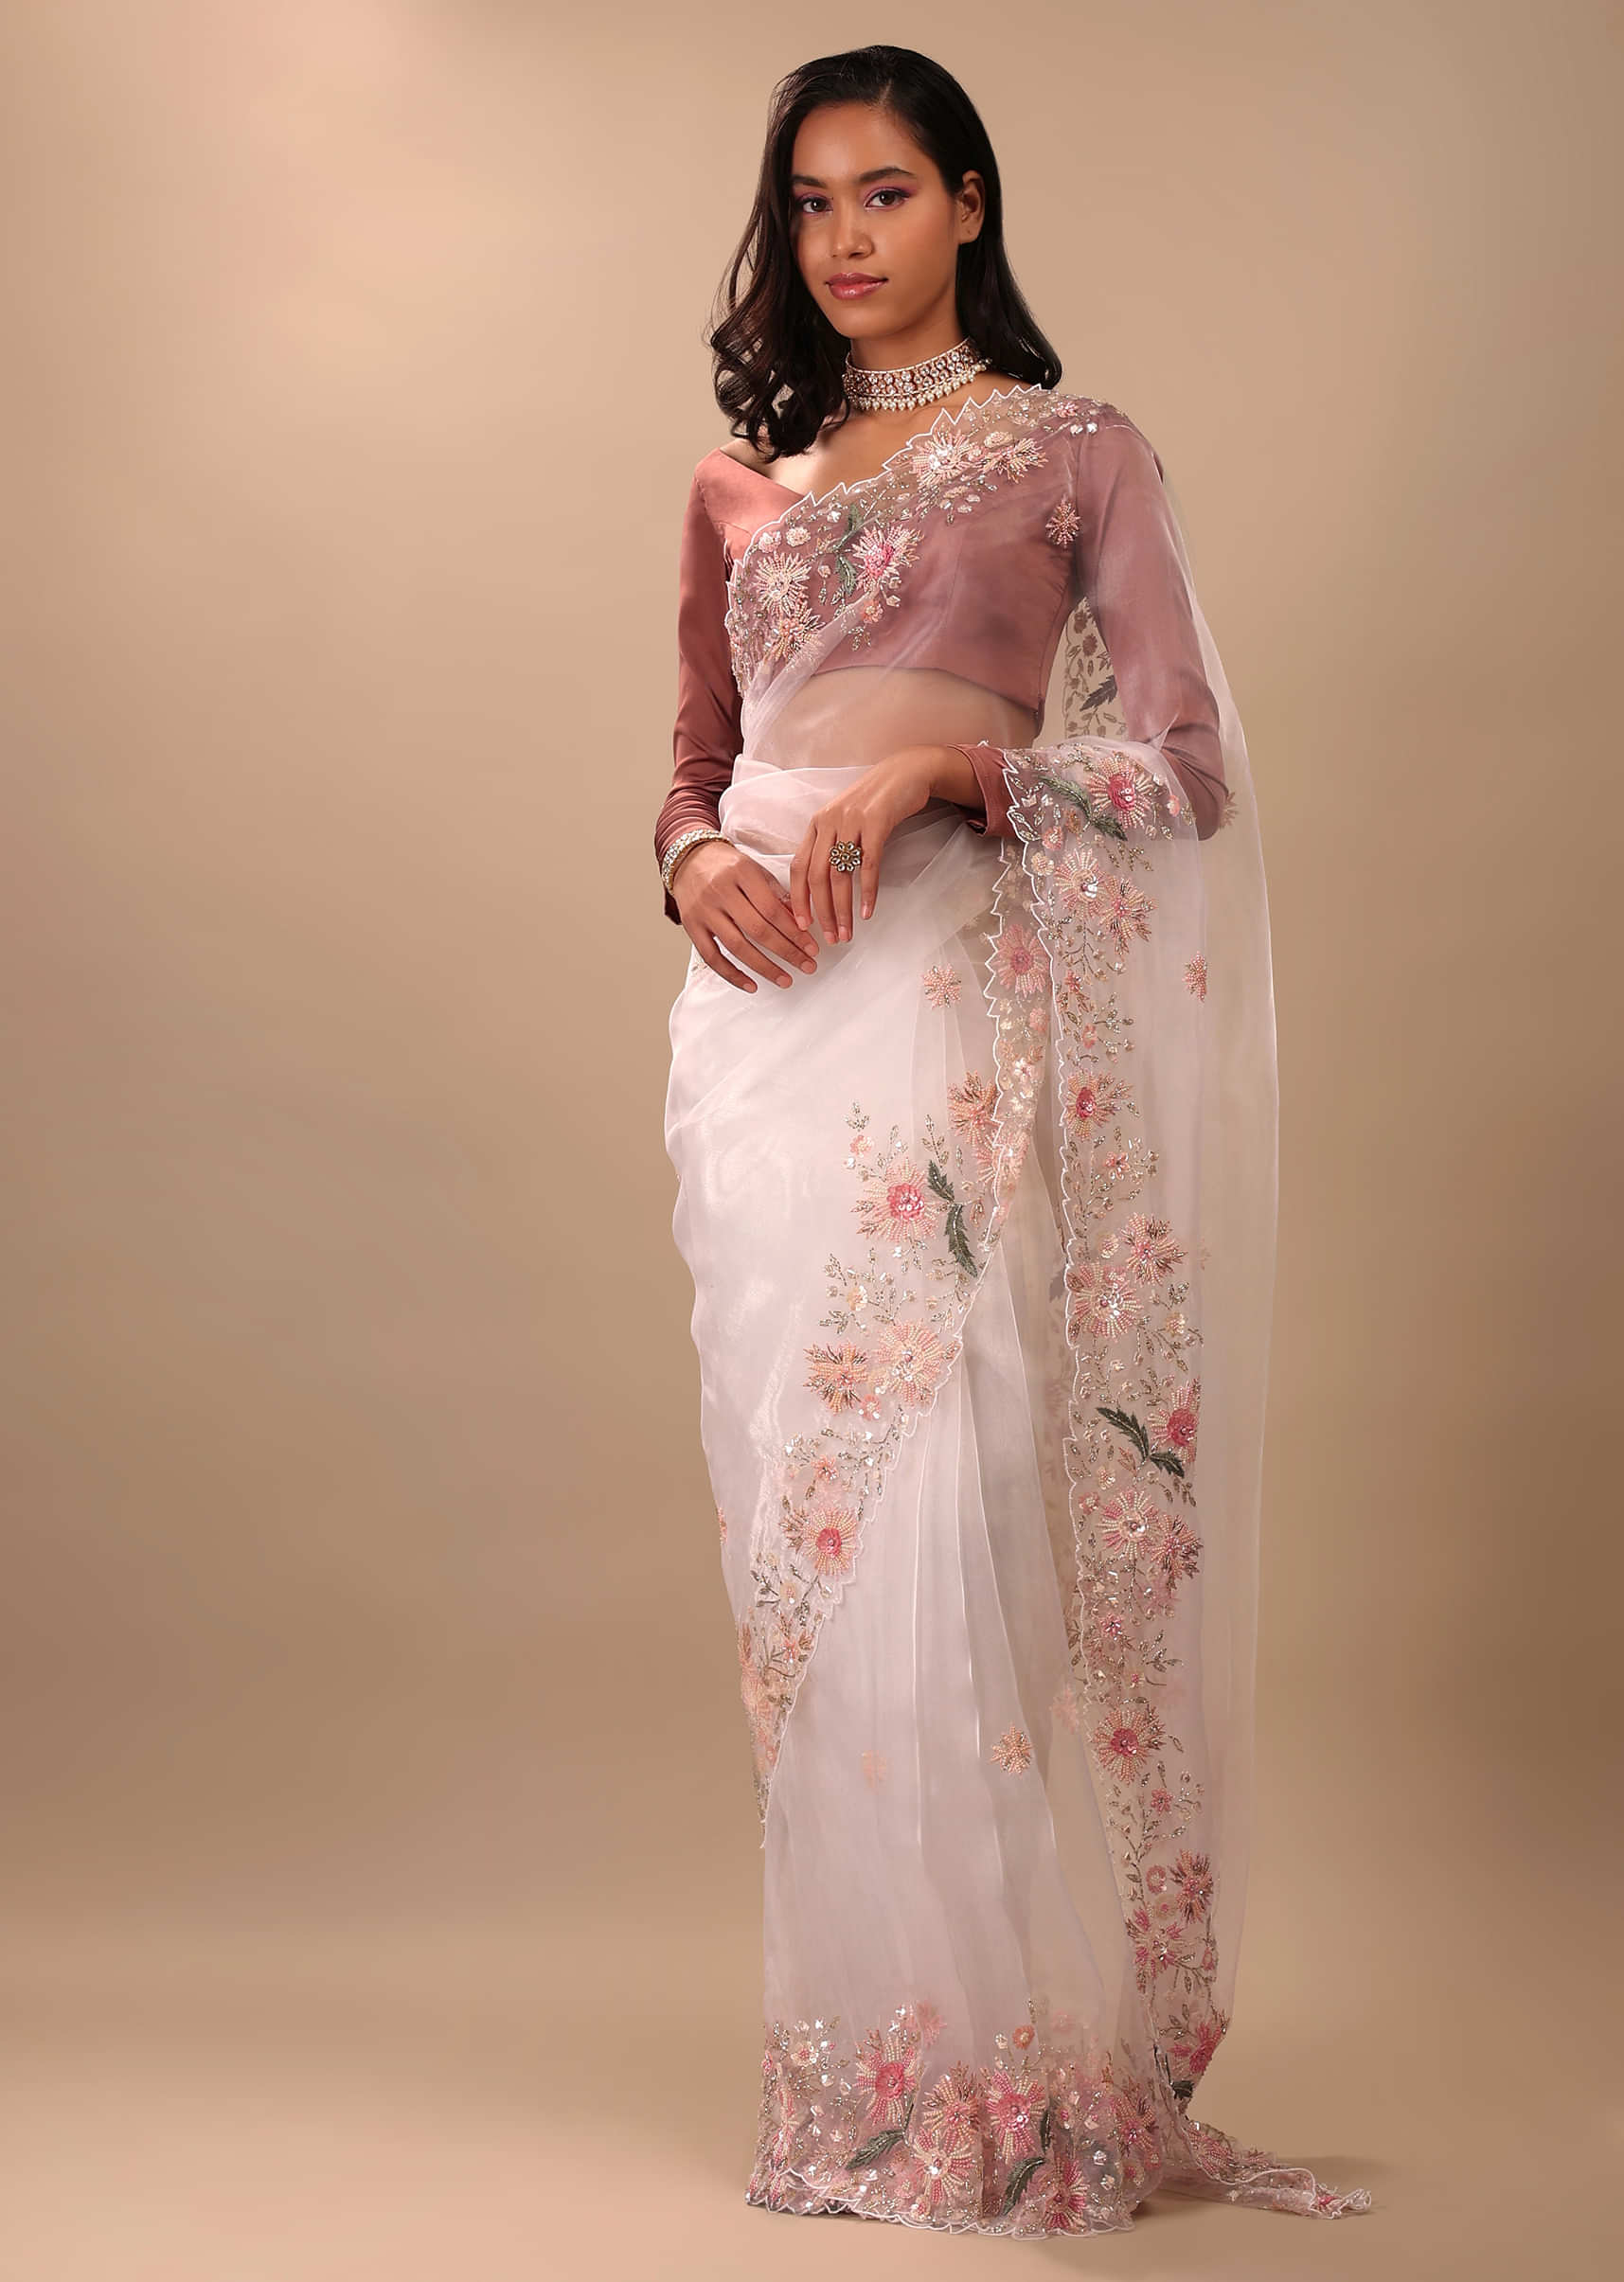 Pearl White Saree In Organza With Floral Print Along With Sequins And  Pearls In Gradient Floral Pattern Online - Kalki Fashion | Designer saree  blouse patterns, Saree look, Saree models